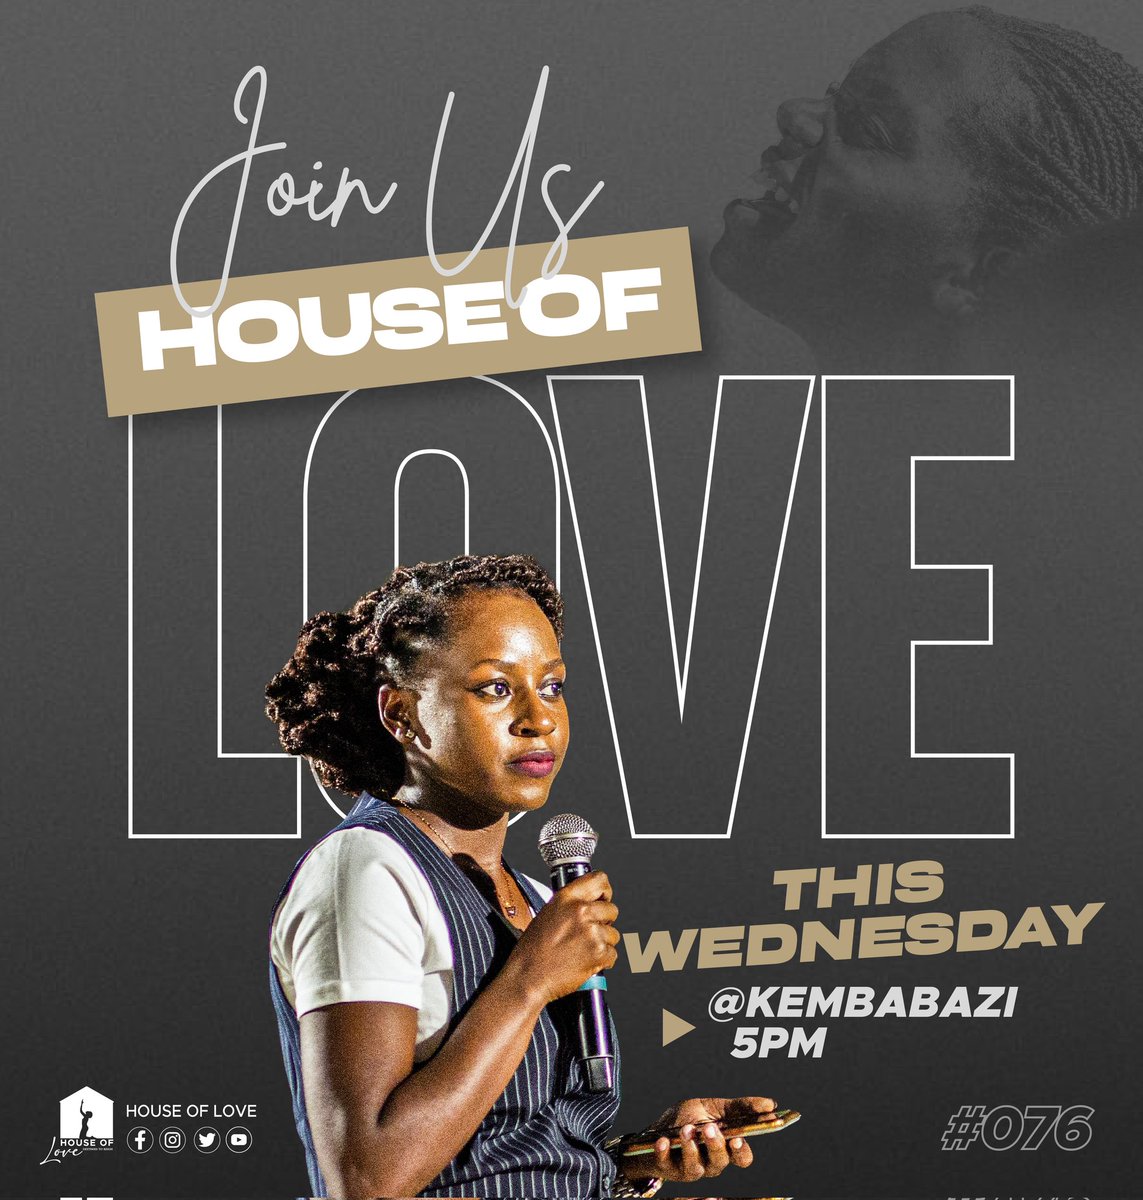 It's NEW, it's FRESH, it's perfectly EXHILARATING 💫 ✨✨ Join us this Wednesday for a special prophetic experience at the House of Love 💥 📍 Kembabazi Catering Center Naguru | 5pm Invite a friend 🔥 #houseofloveug #wednesdayservice